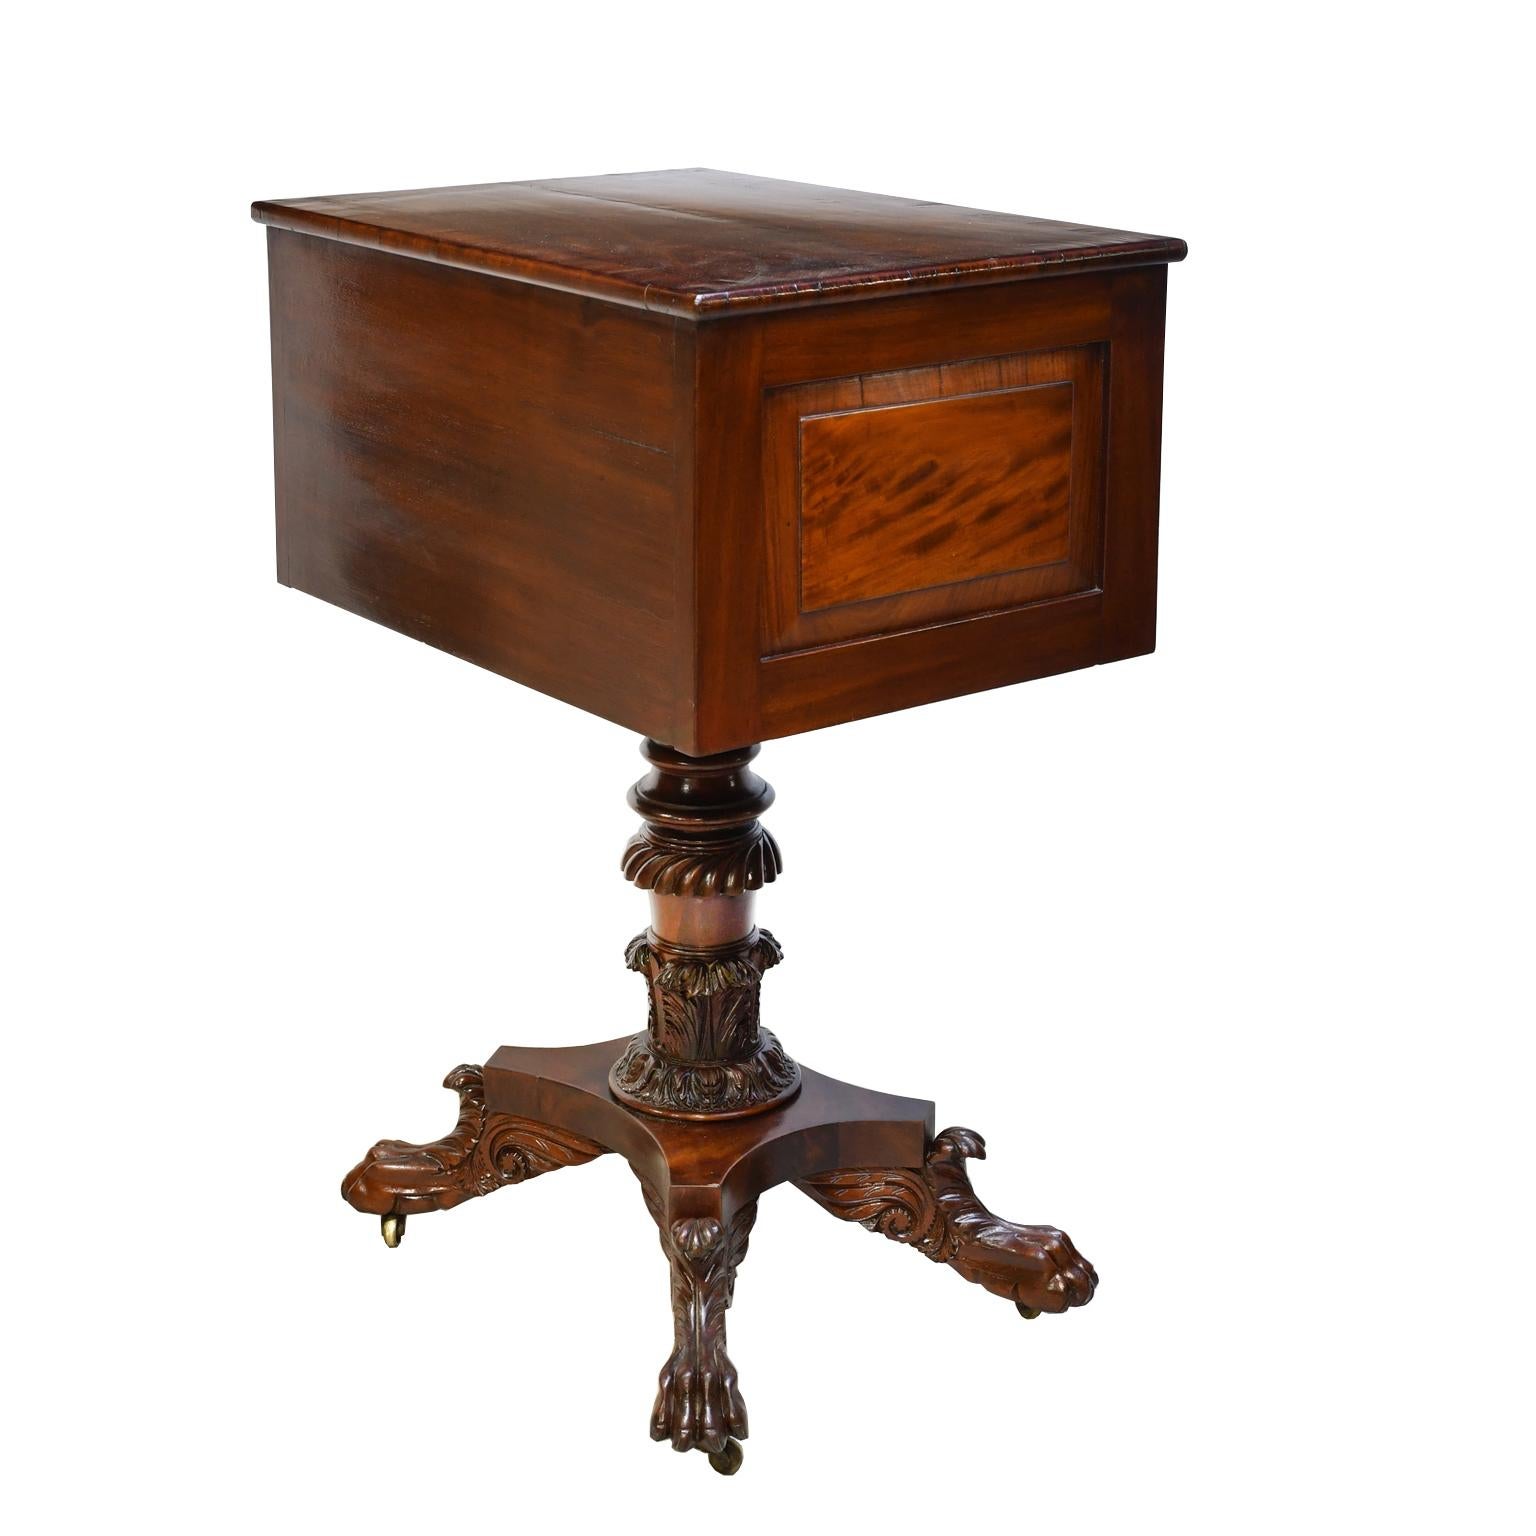 Cast Philadelphia Federal Work or End Table in Mahogany, circa 1820